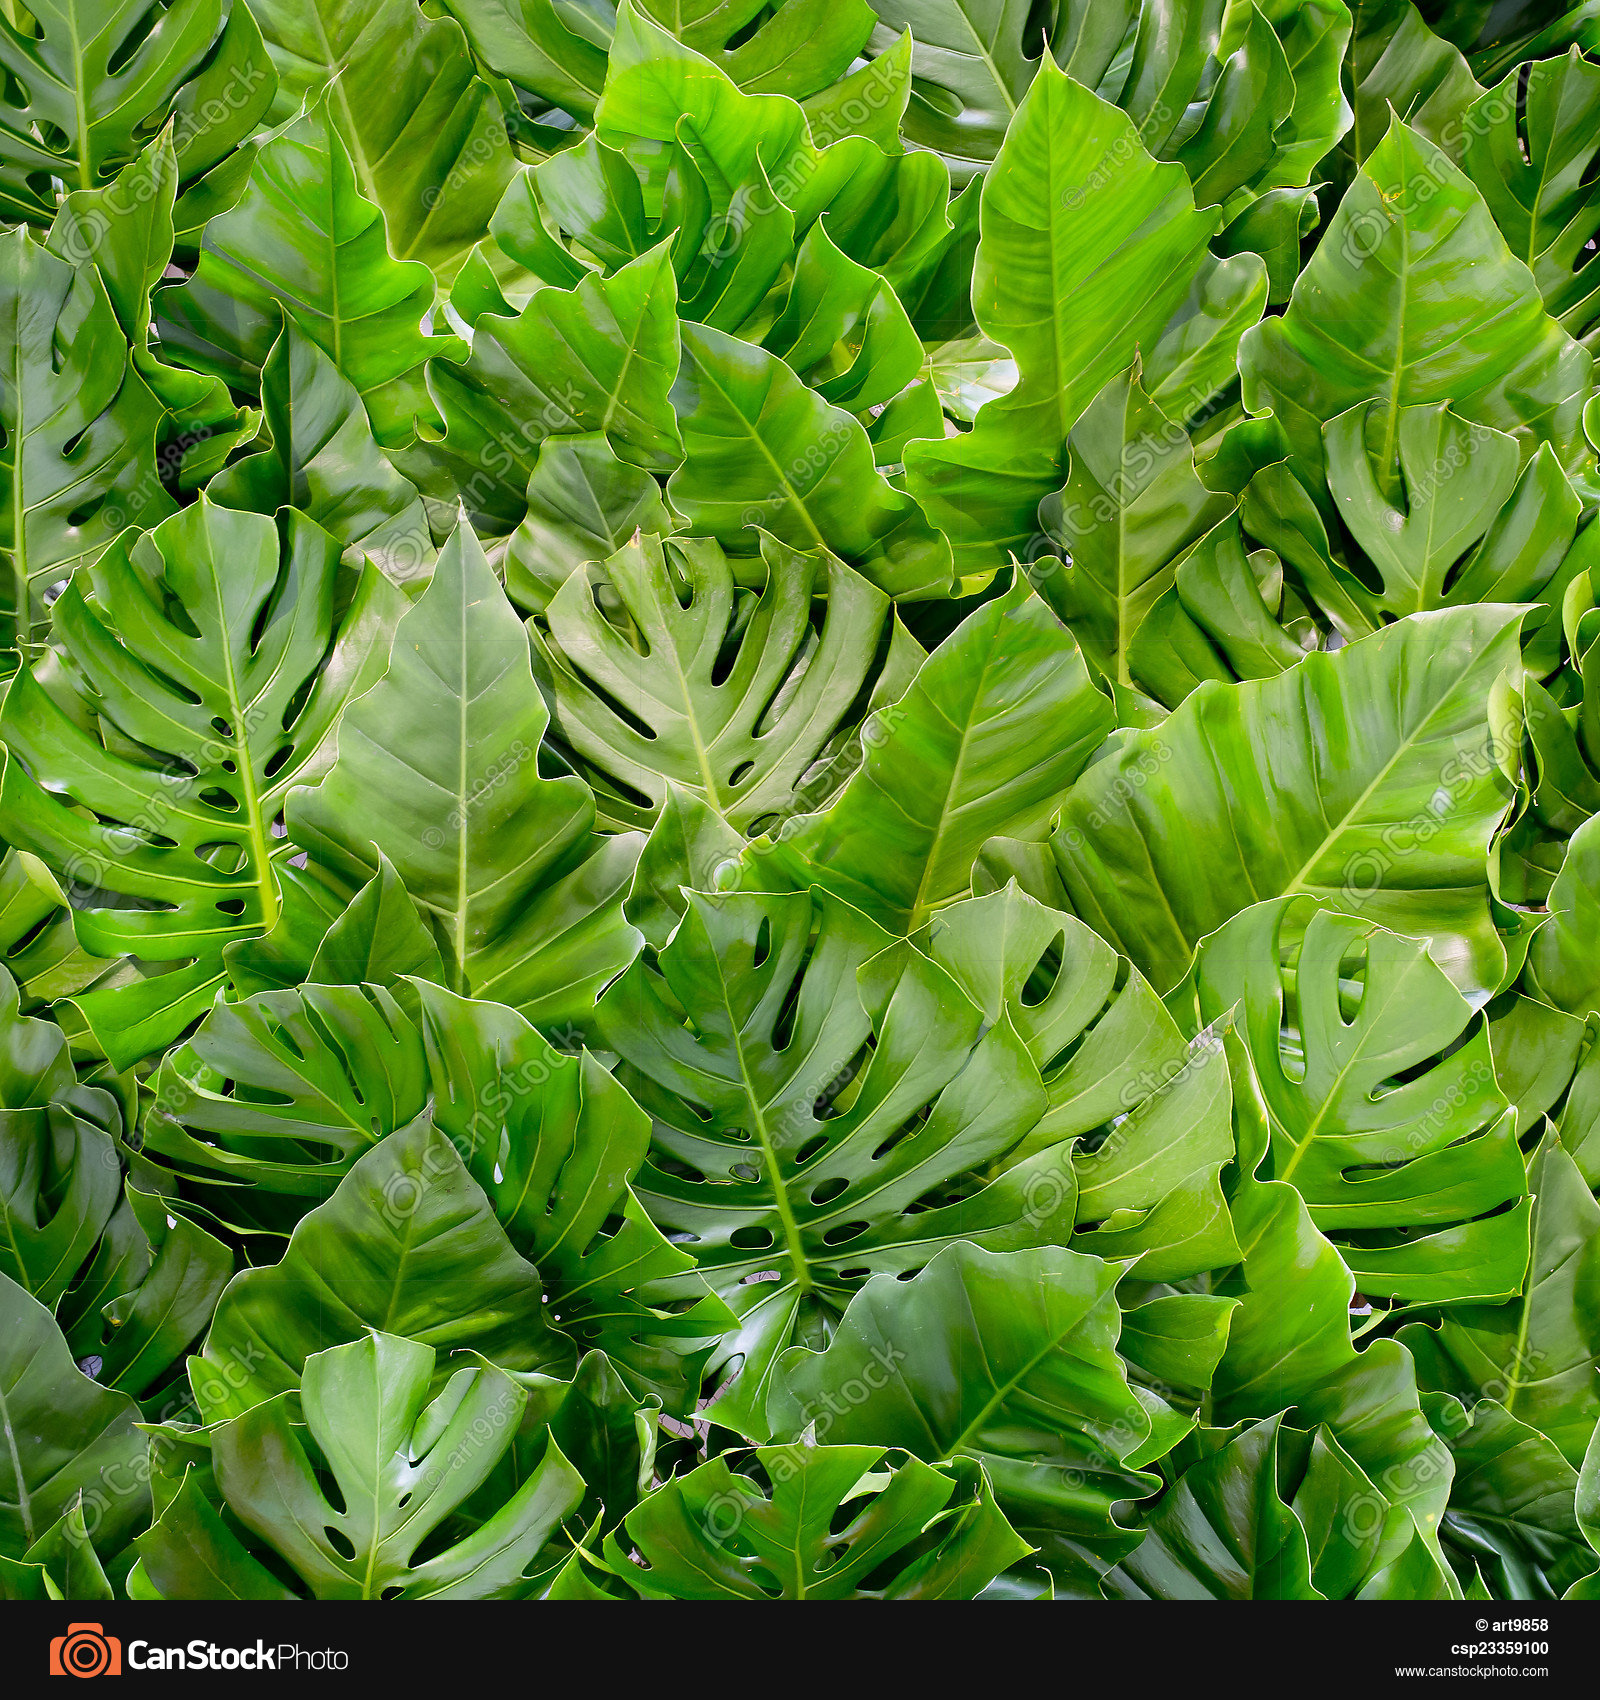 Big green leafs background stock photography - Search Pictures and ...